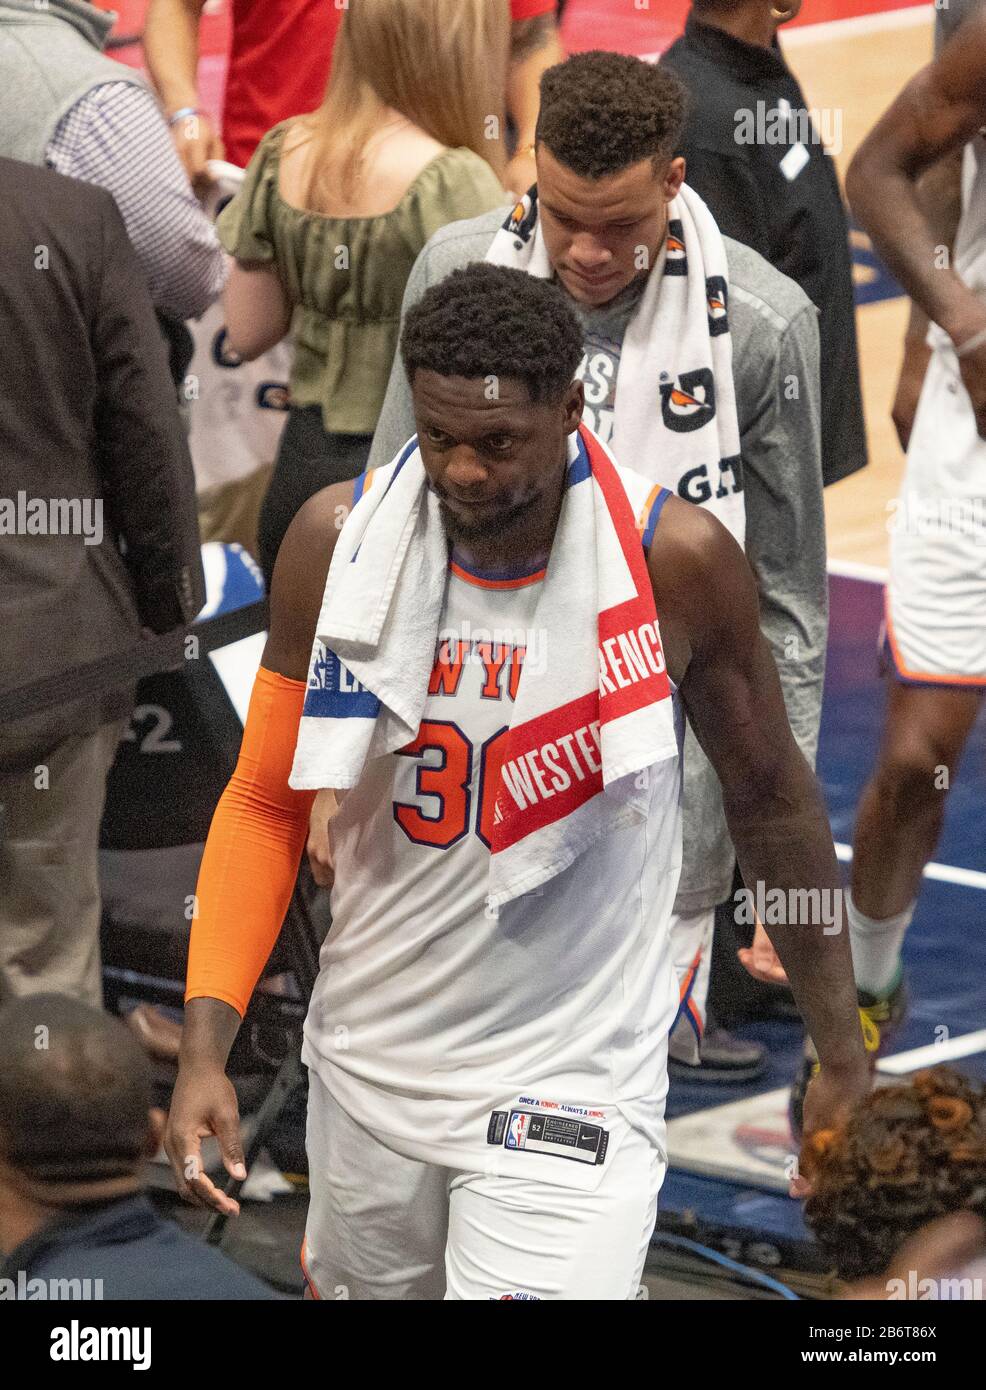 New York Knicks forward Julius Randle (30) leaves the court following the game against the Washington Wizards at the Capital One Arena in Washington, DC on March 10, 2020. The Wizards won the game 122-115.Credit: Ron Sachs/CNP (RESTRICTION: NO New York or New Jersey Newspapers or newspapers within a 75 mile radius of New York City) | usage worldwide Stock Photo